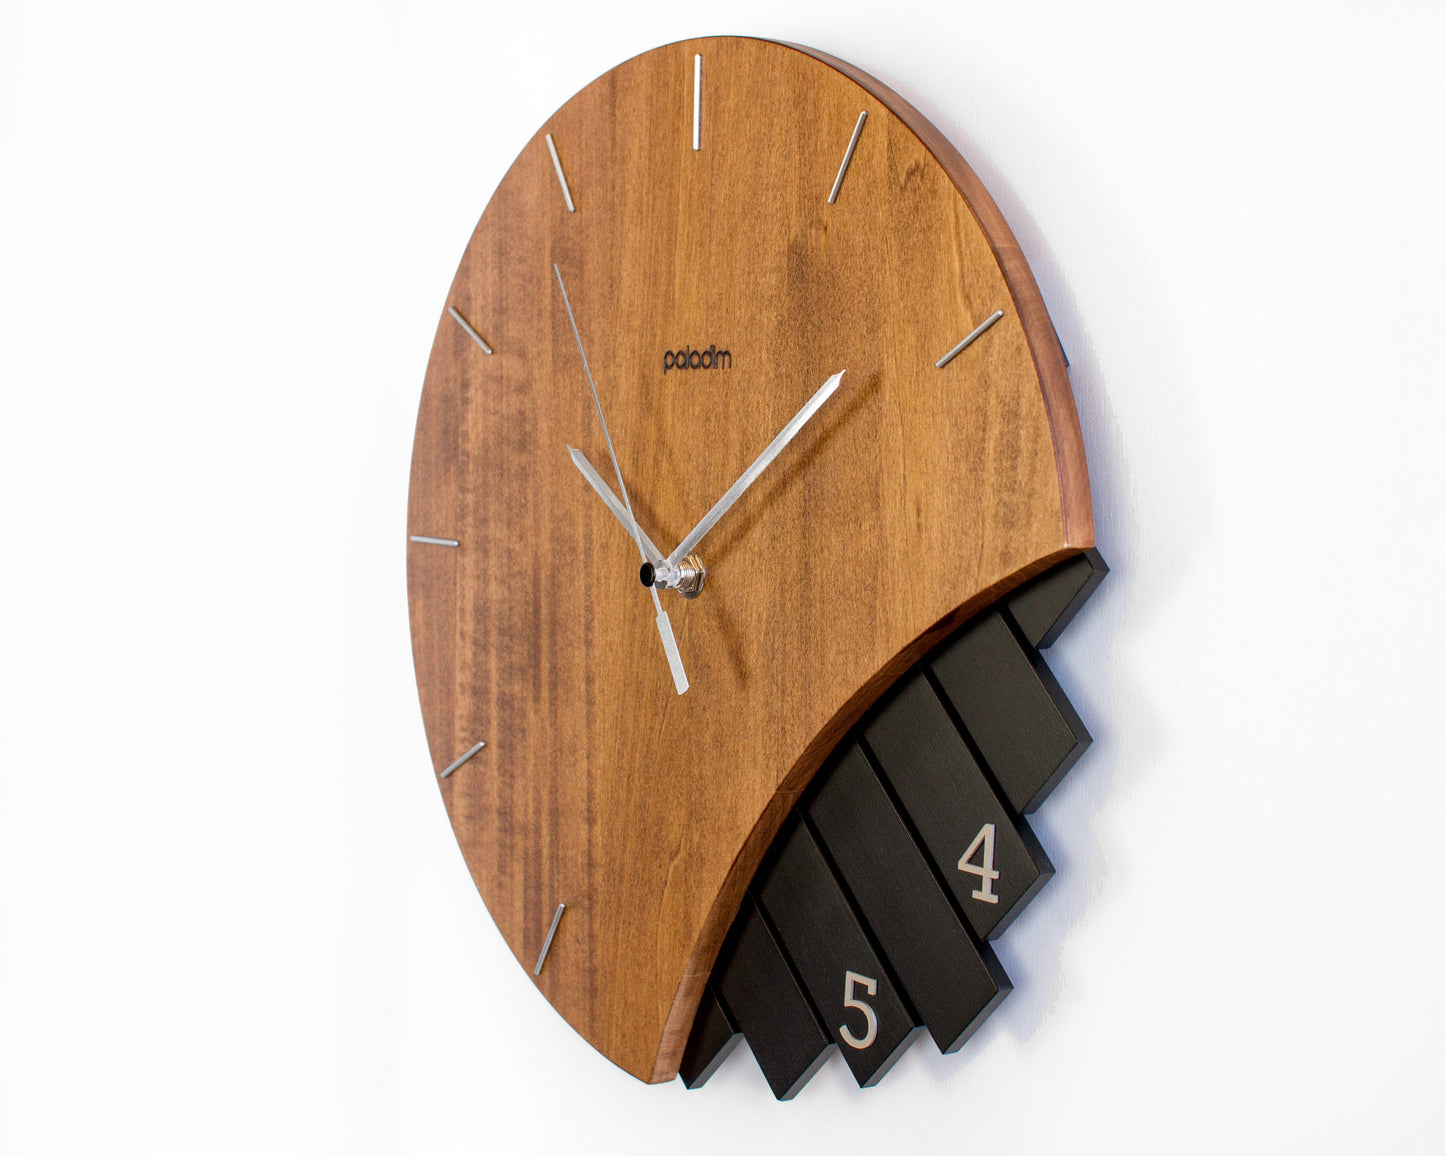 CHAST 2 component wall clock